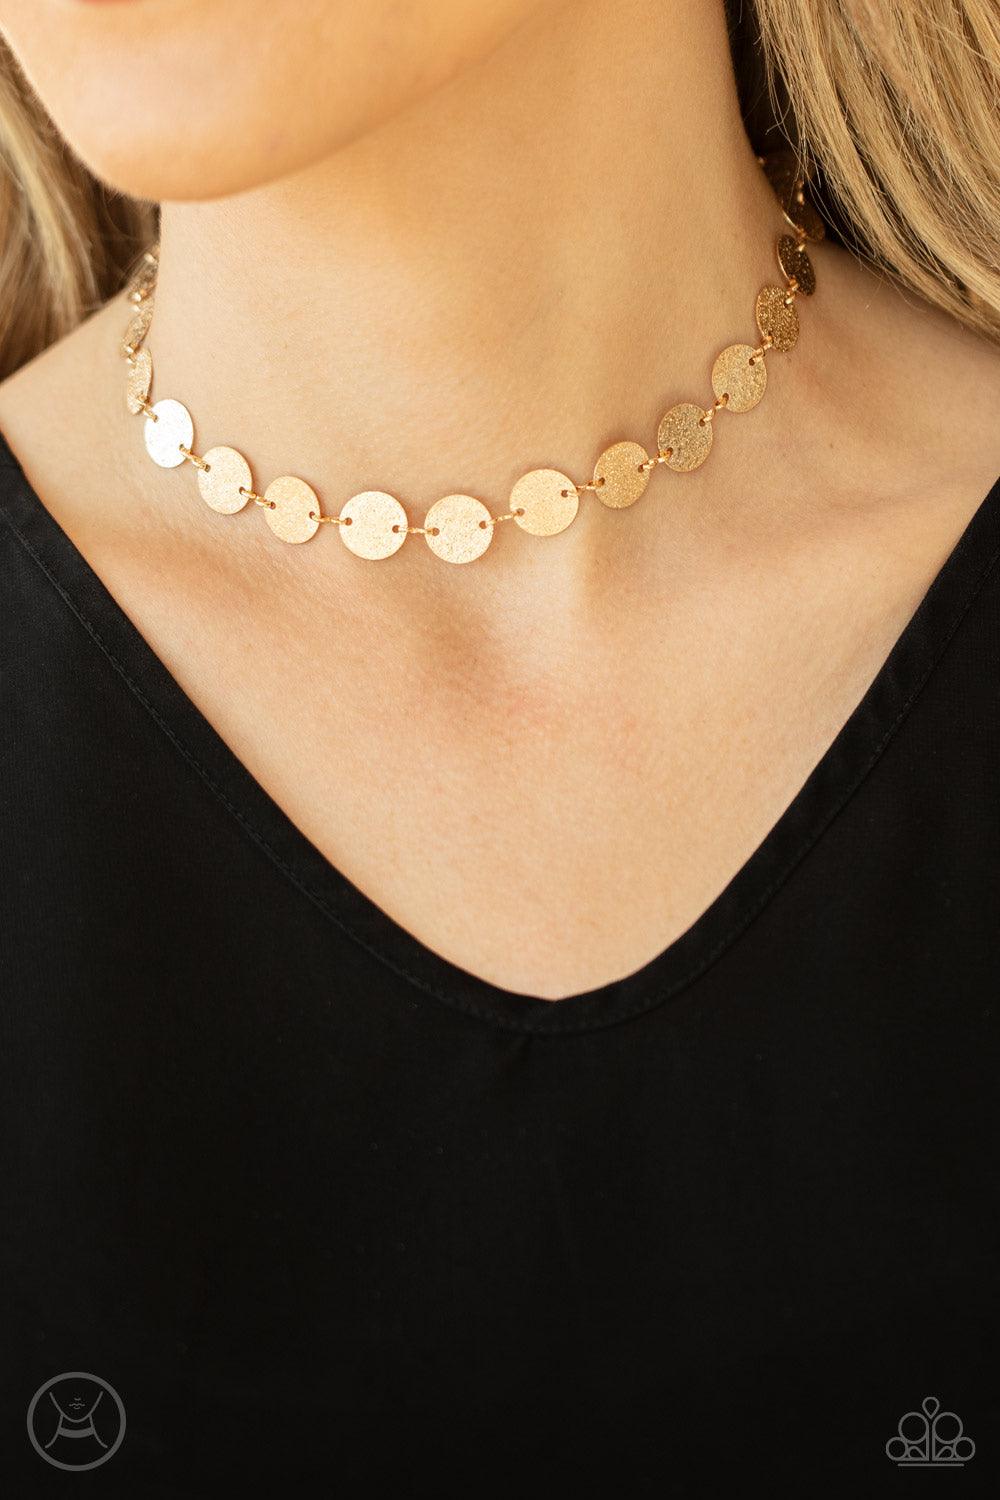 Paparazzi Accessories Reflection Detection - Gold Hammered in shimmery detail, a shiny collection of dainty gold discs delicately link into a blinding display around the neck. Features an adjustable clasp closure. Sold as one individual choker necklace. I